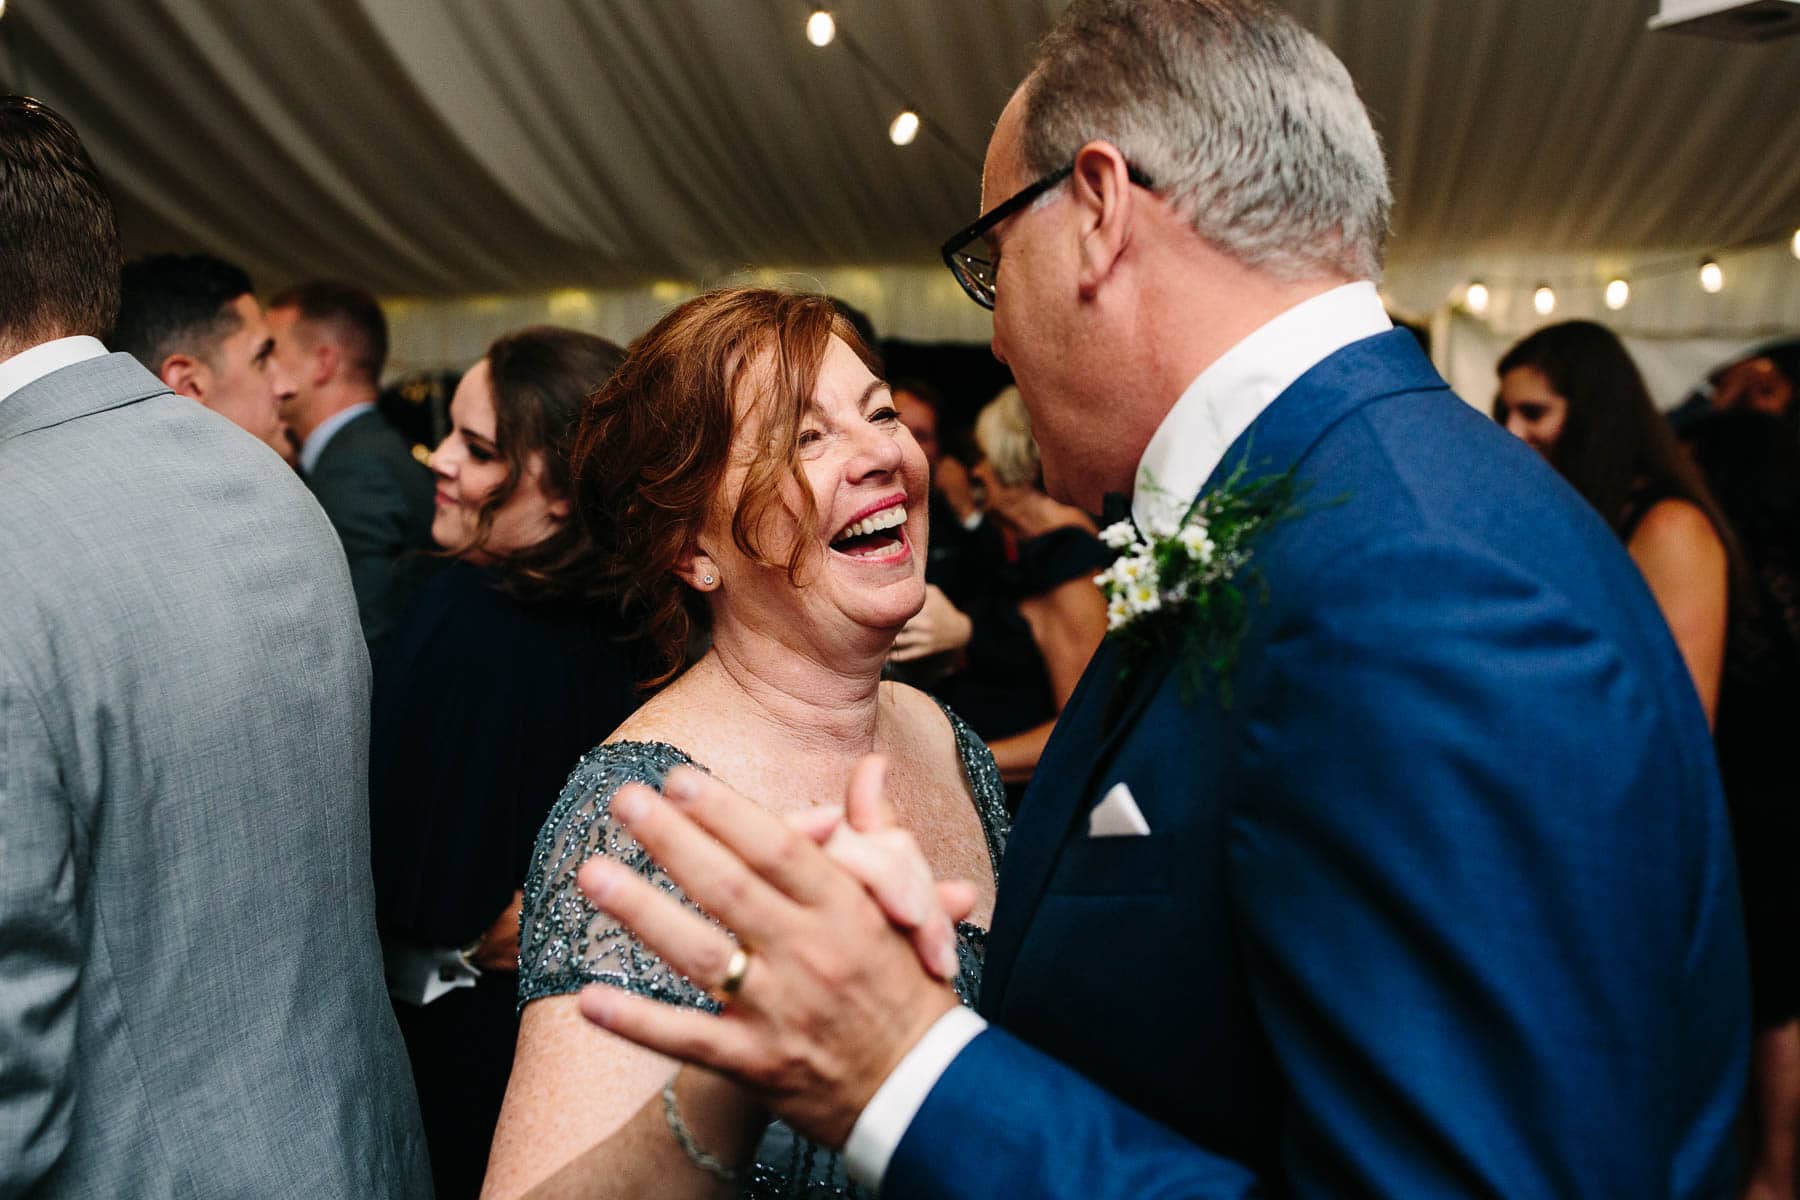 parents of the groom dance during reception | Kelly Benvenuto Photography